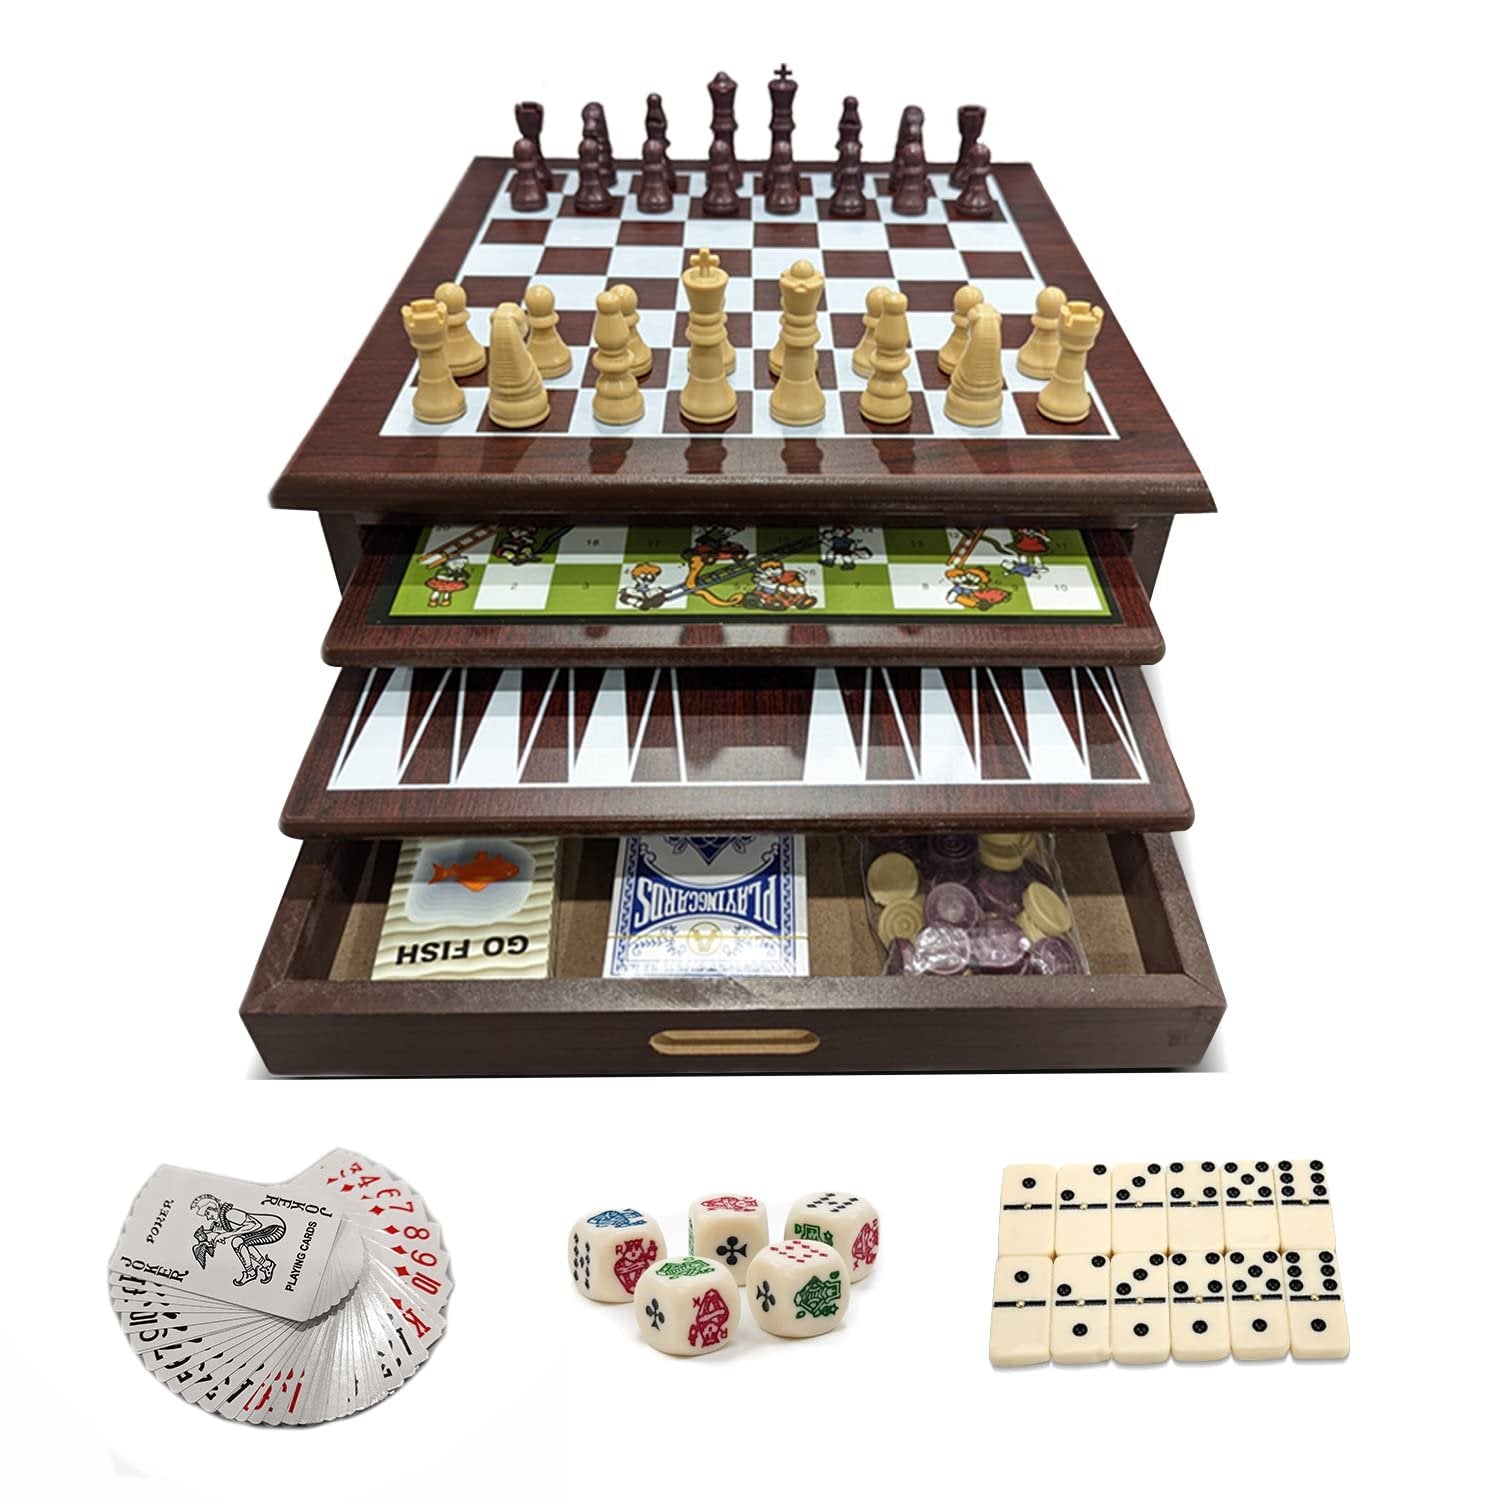 Bundaloo 15-in-1 Tabletop Game Center - Portable Wooden Combo Game Board with Classic Games - Unique Set with Dice, Dominos, Playing Cards & Game Pieces - for Kids & Adults - Wood Finish, 12x12x5.5